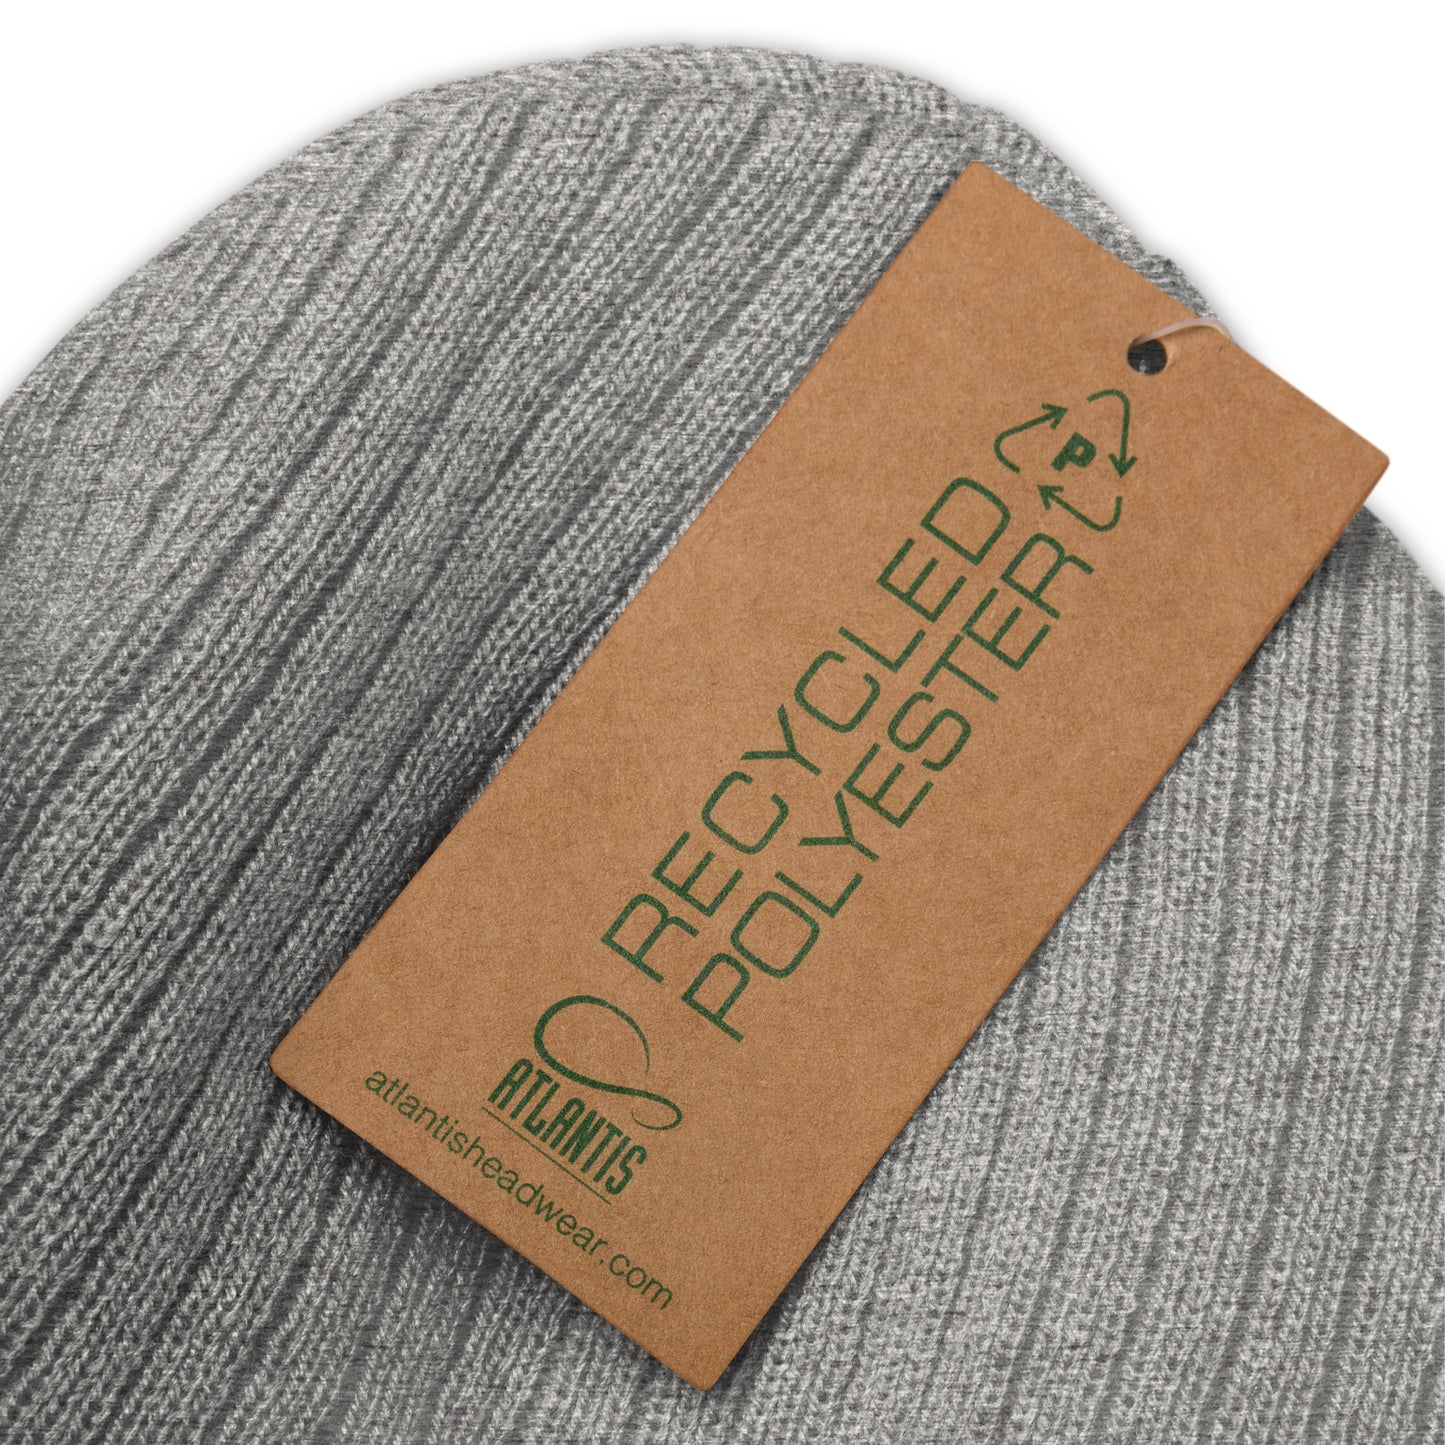 ANGELCOR ARMY Ribbed knit beanie